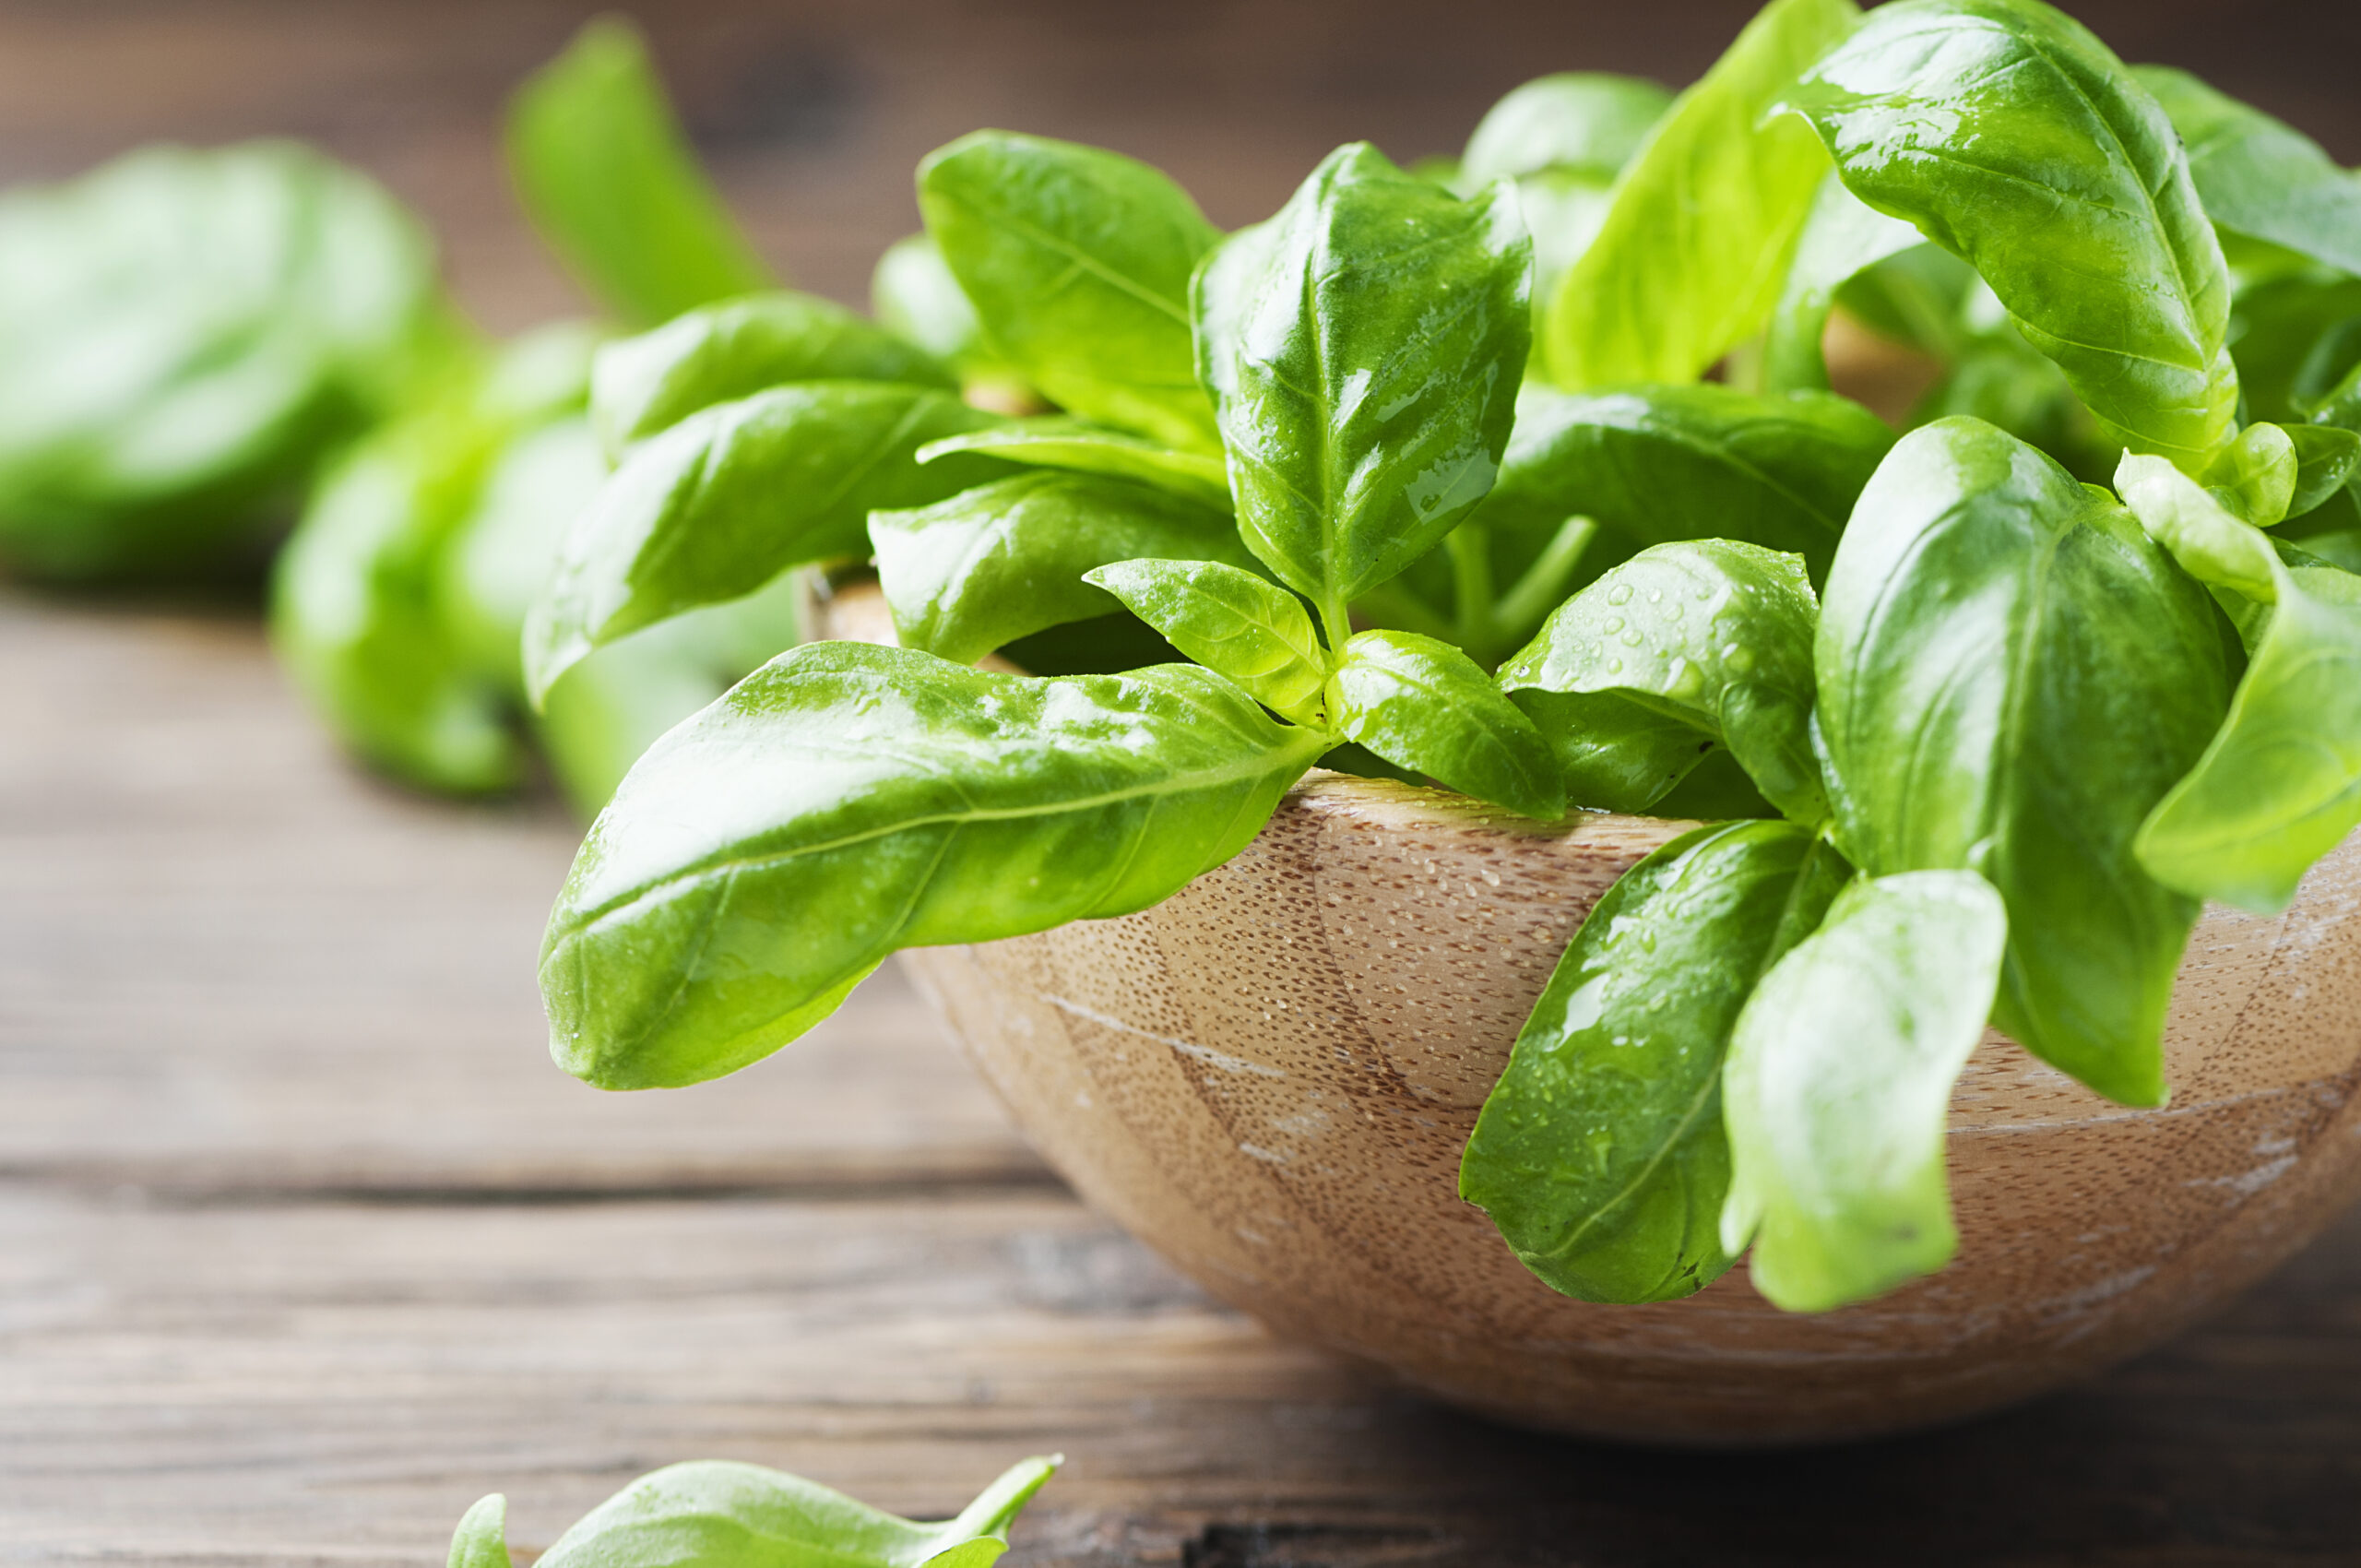 Basil May Help To Restore Lipid Metabolism & Prevent Oxidation